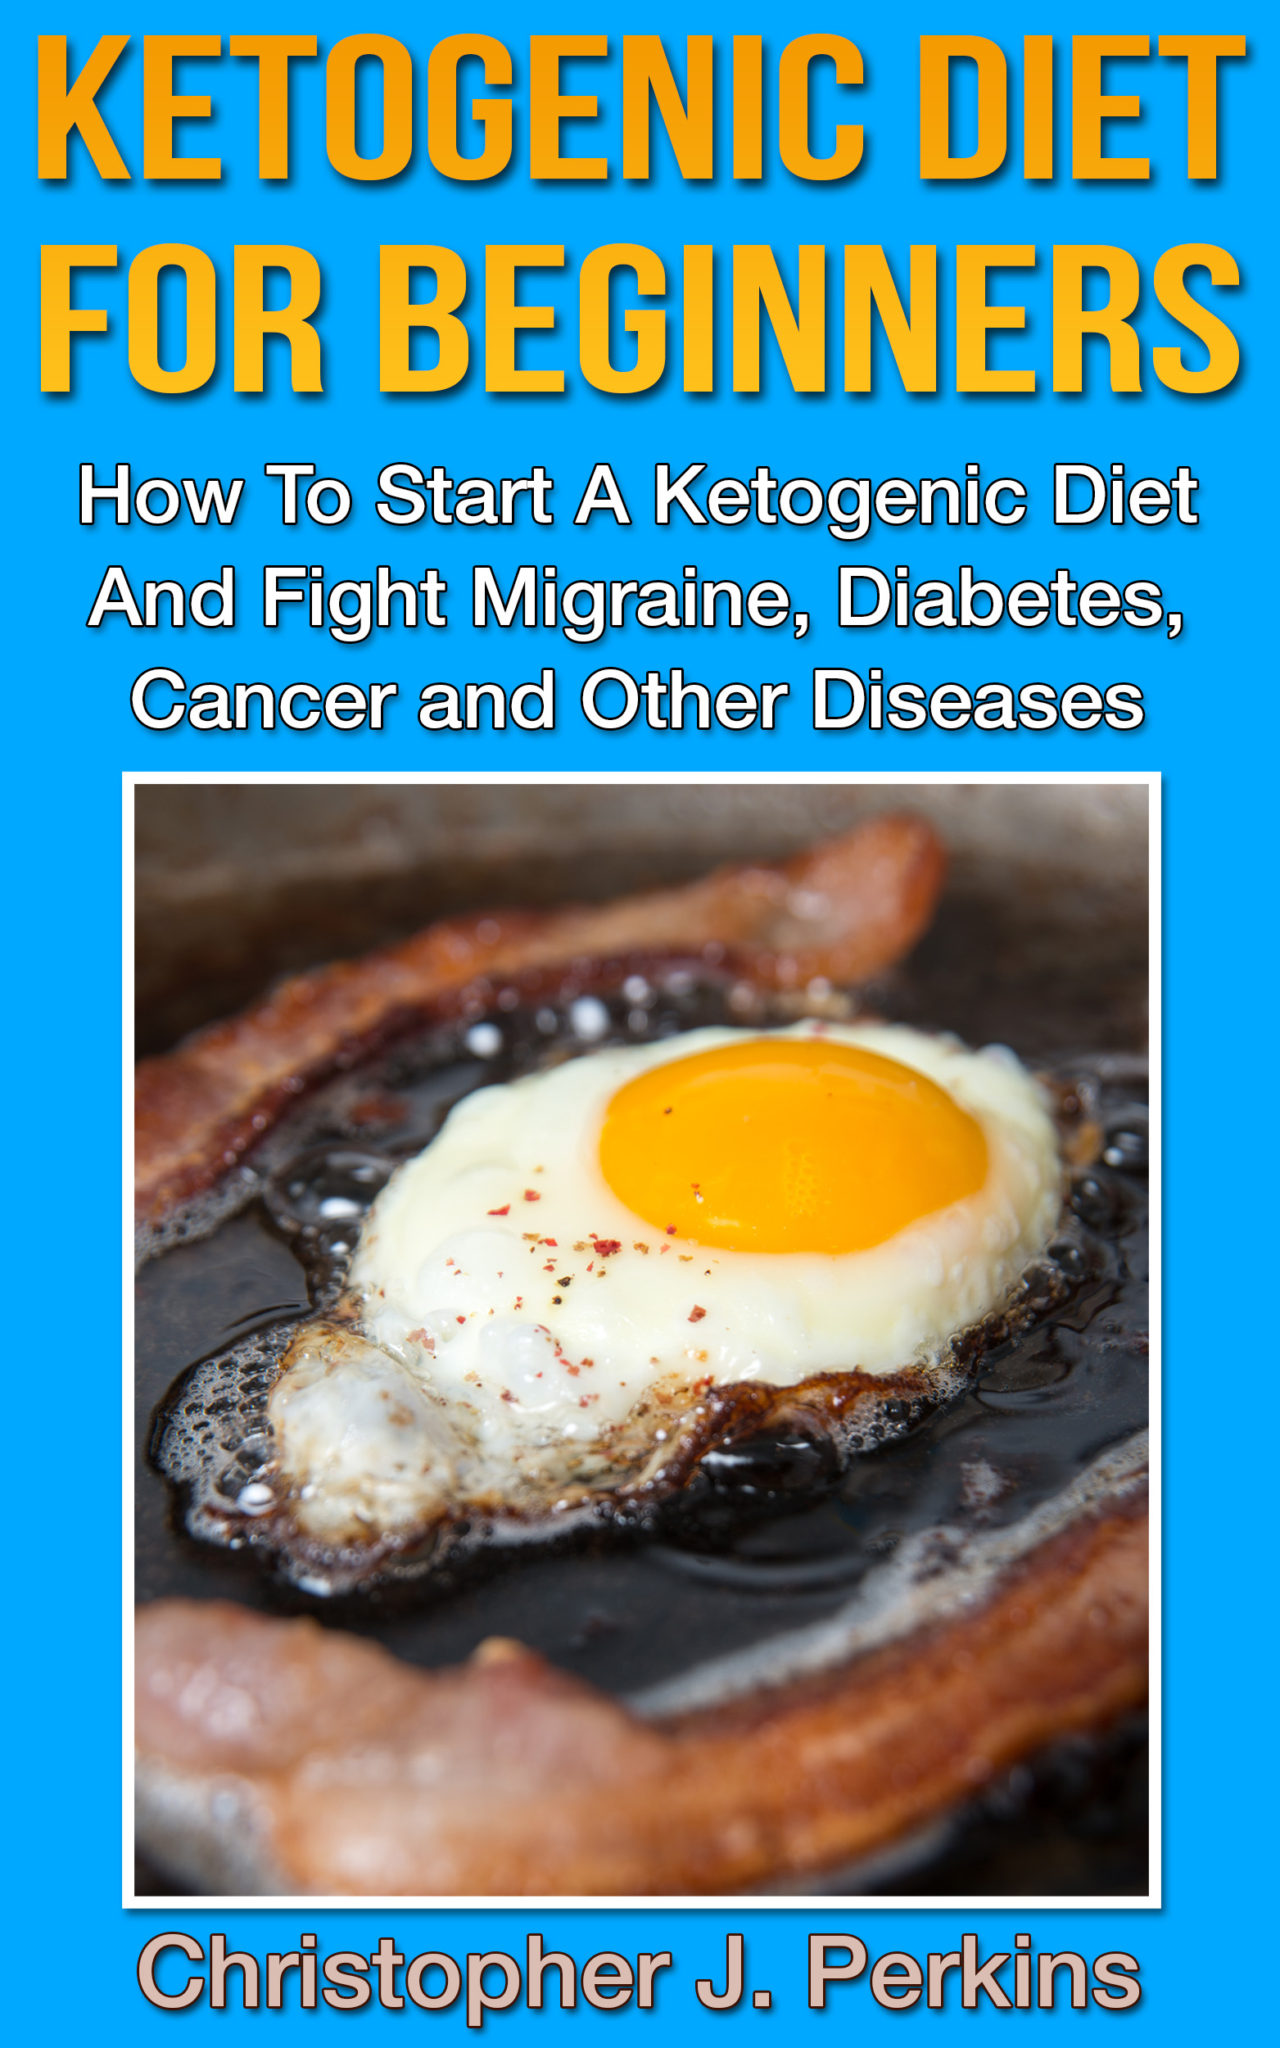 Ketogenic Diet For Beginners – How To Start A Ketogenic Diet And Fight Migraine, Diabetes, Cancer and Other Diseases by Christopher J. Perkins